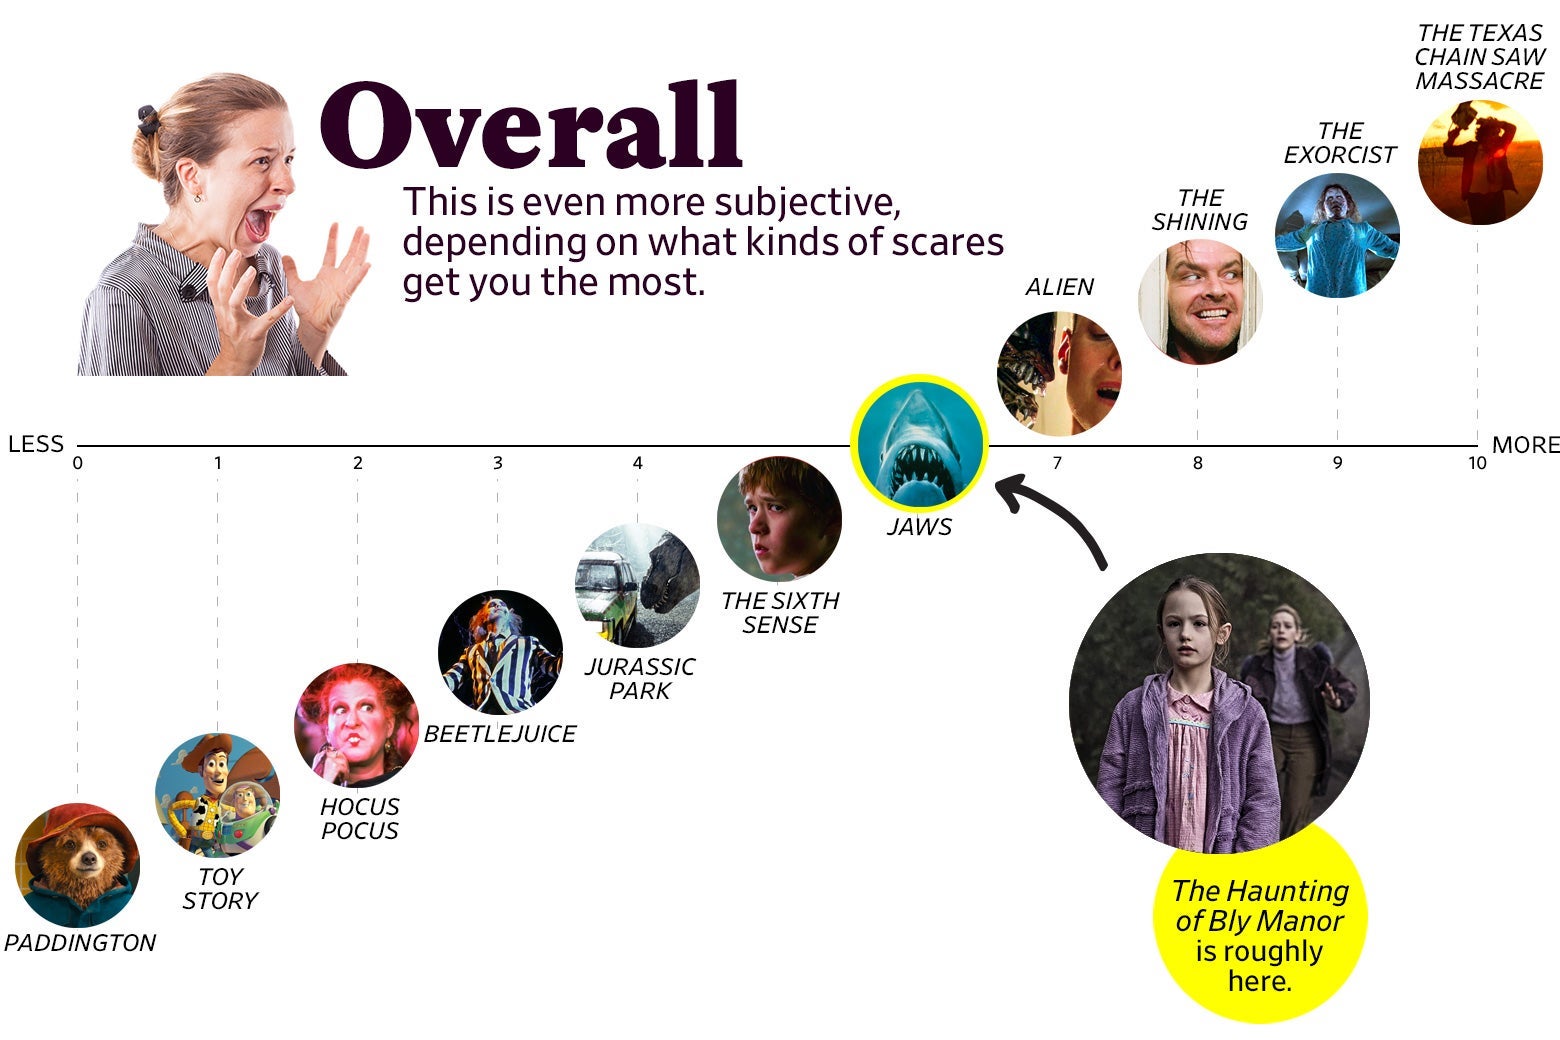 A chart titled “Overall: This is even more subjective, depending on what kinds of scares get you the most” shows that Bly Manor ranks as a 6 overall, roughly the same as Jaws. The scale ranges from Paddington (0) to the original Texas Chain Saw Massacre (10).